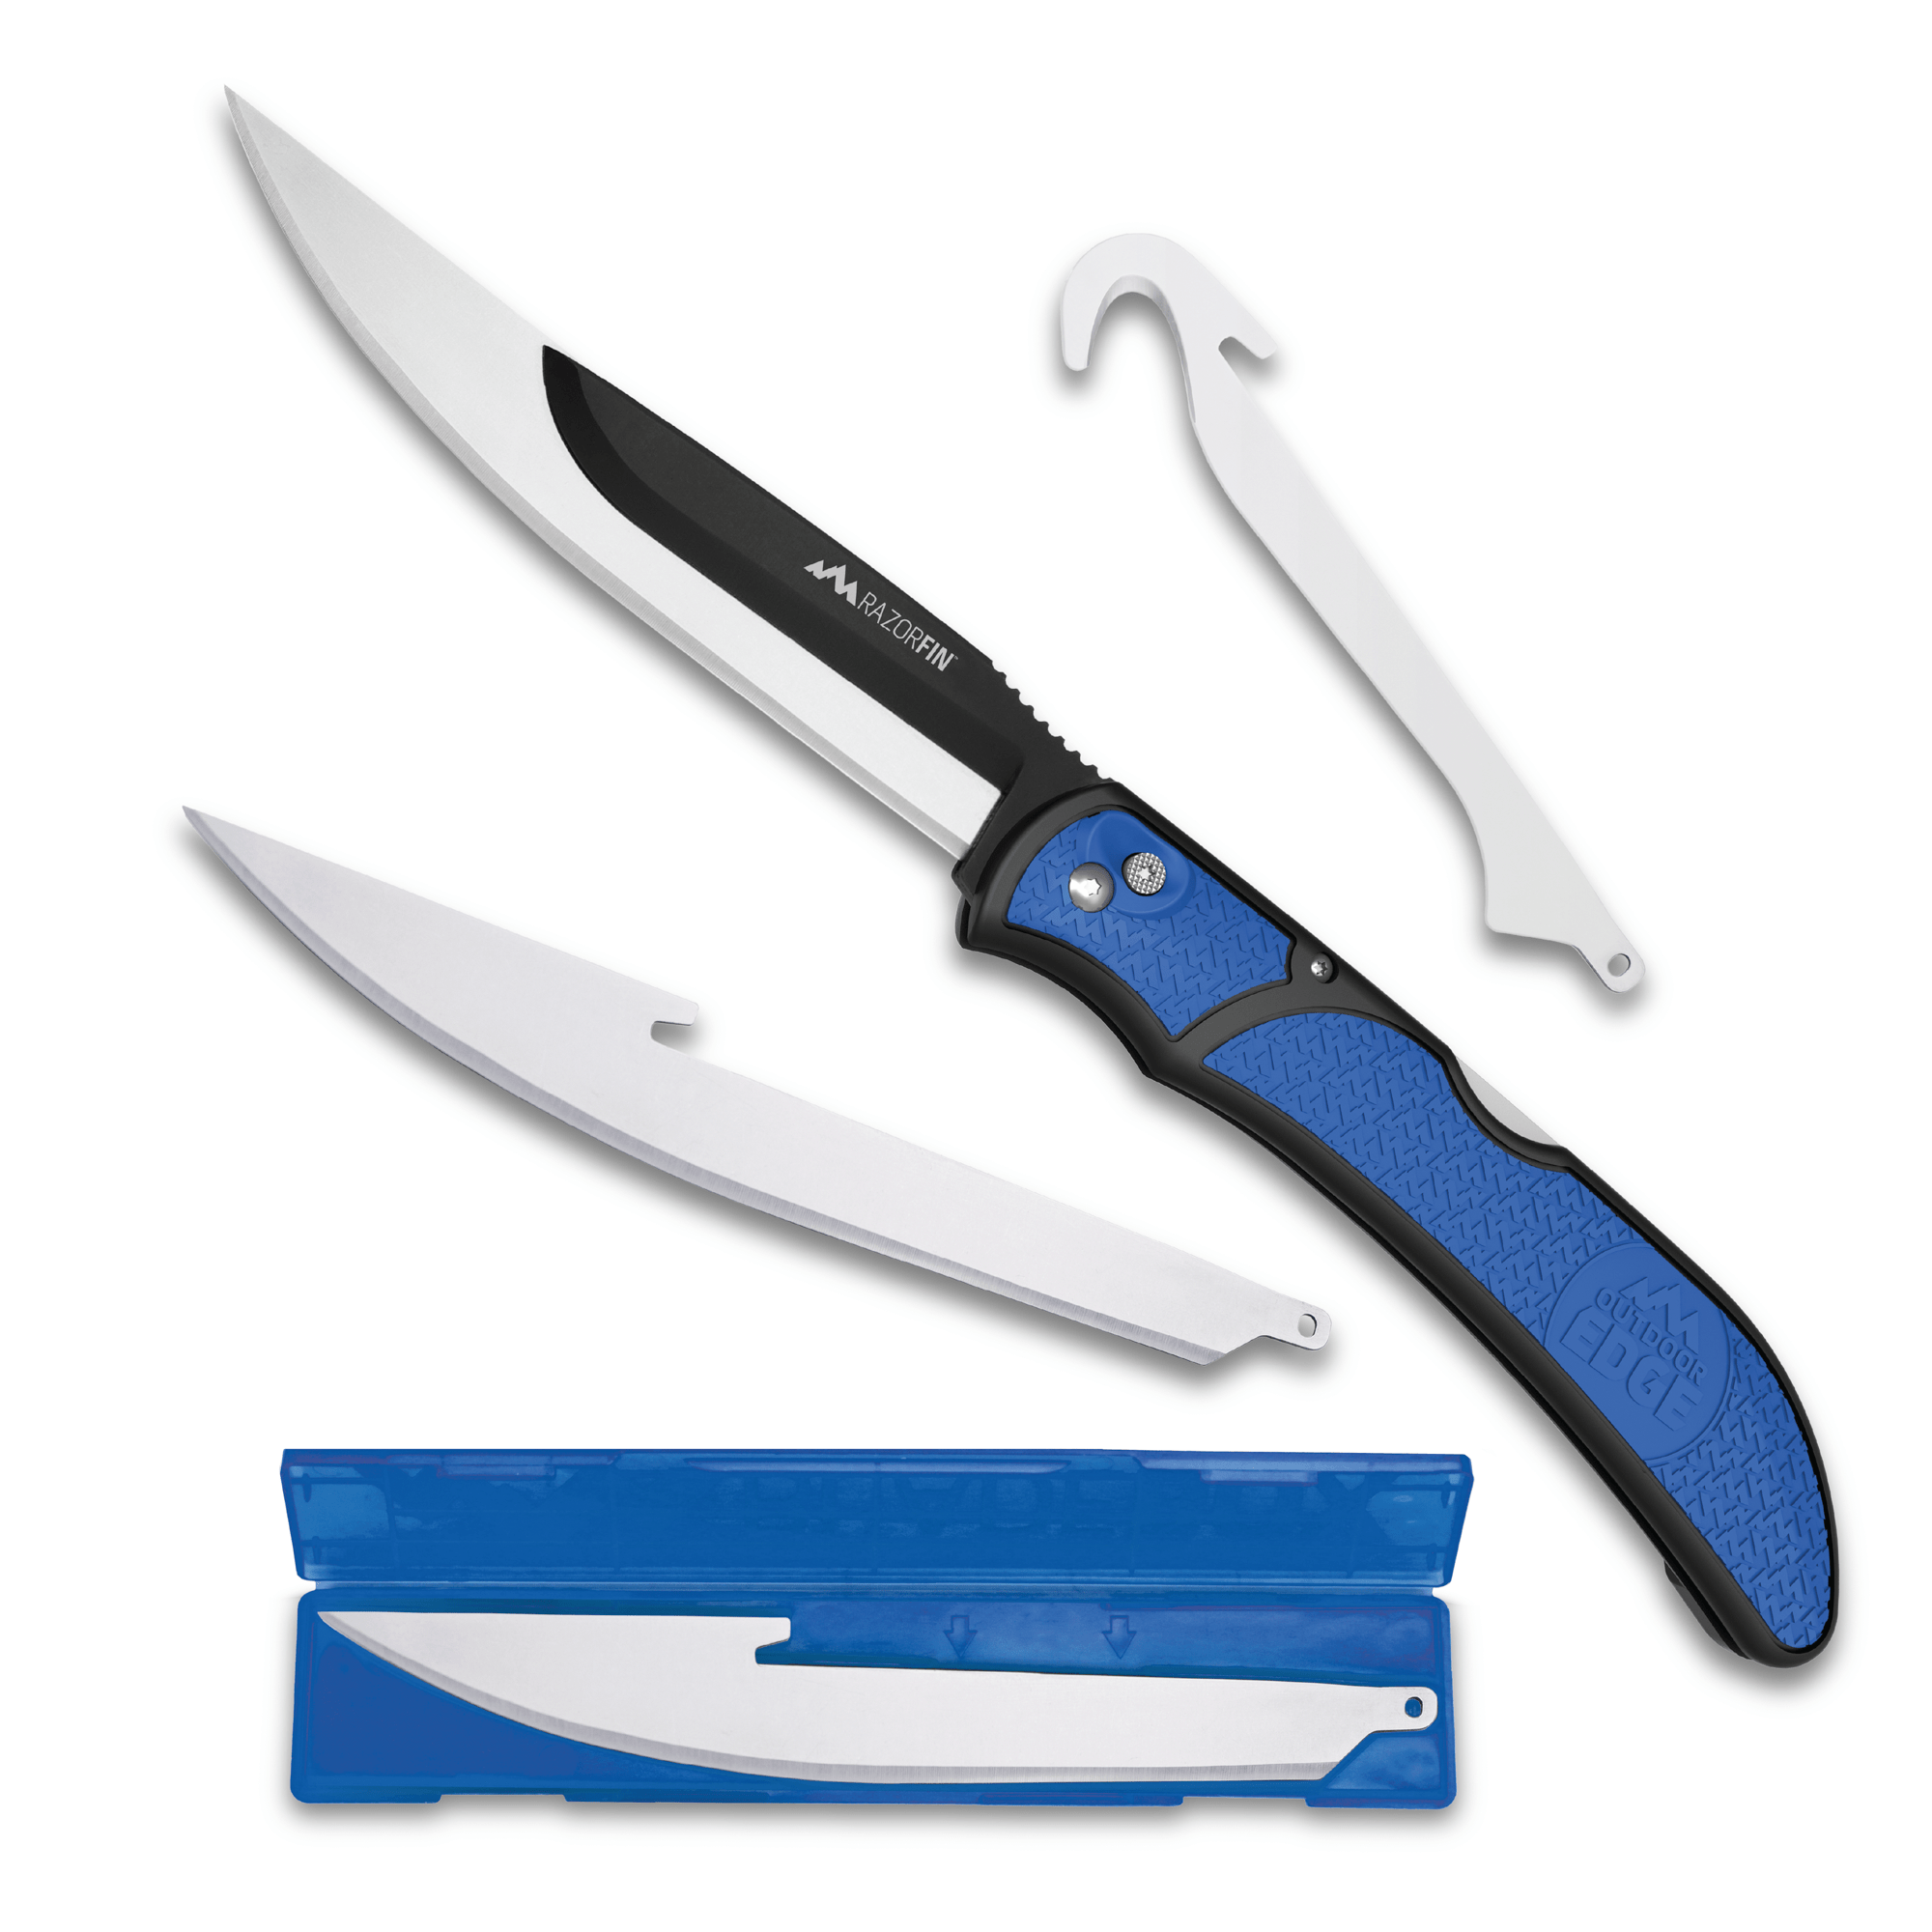 Outdoor Edge RazorFin Fillet Knife Product Photo showing 4 blades